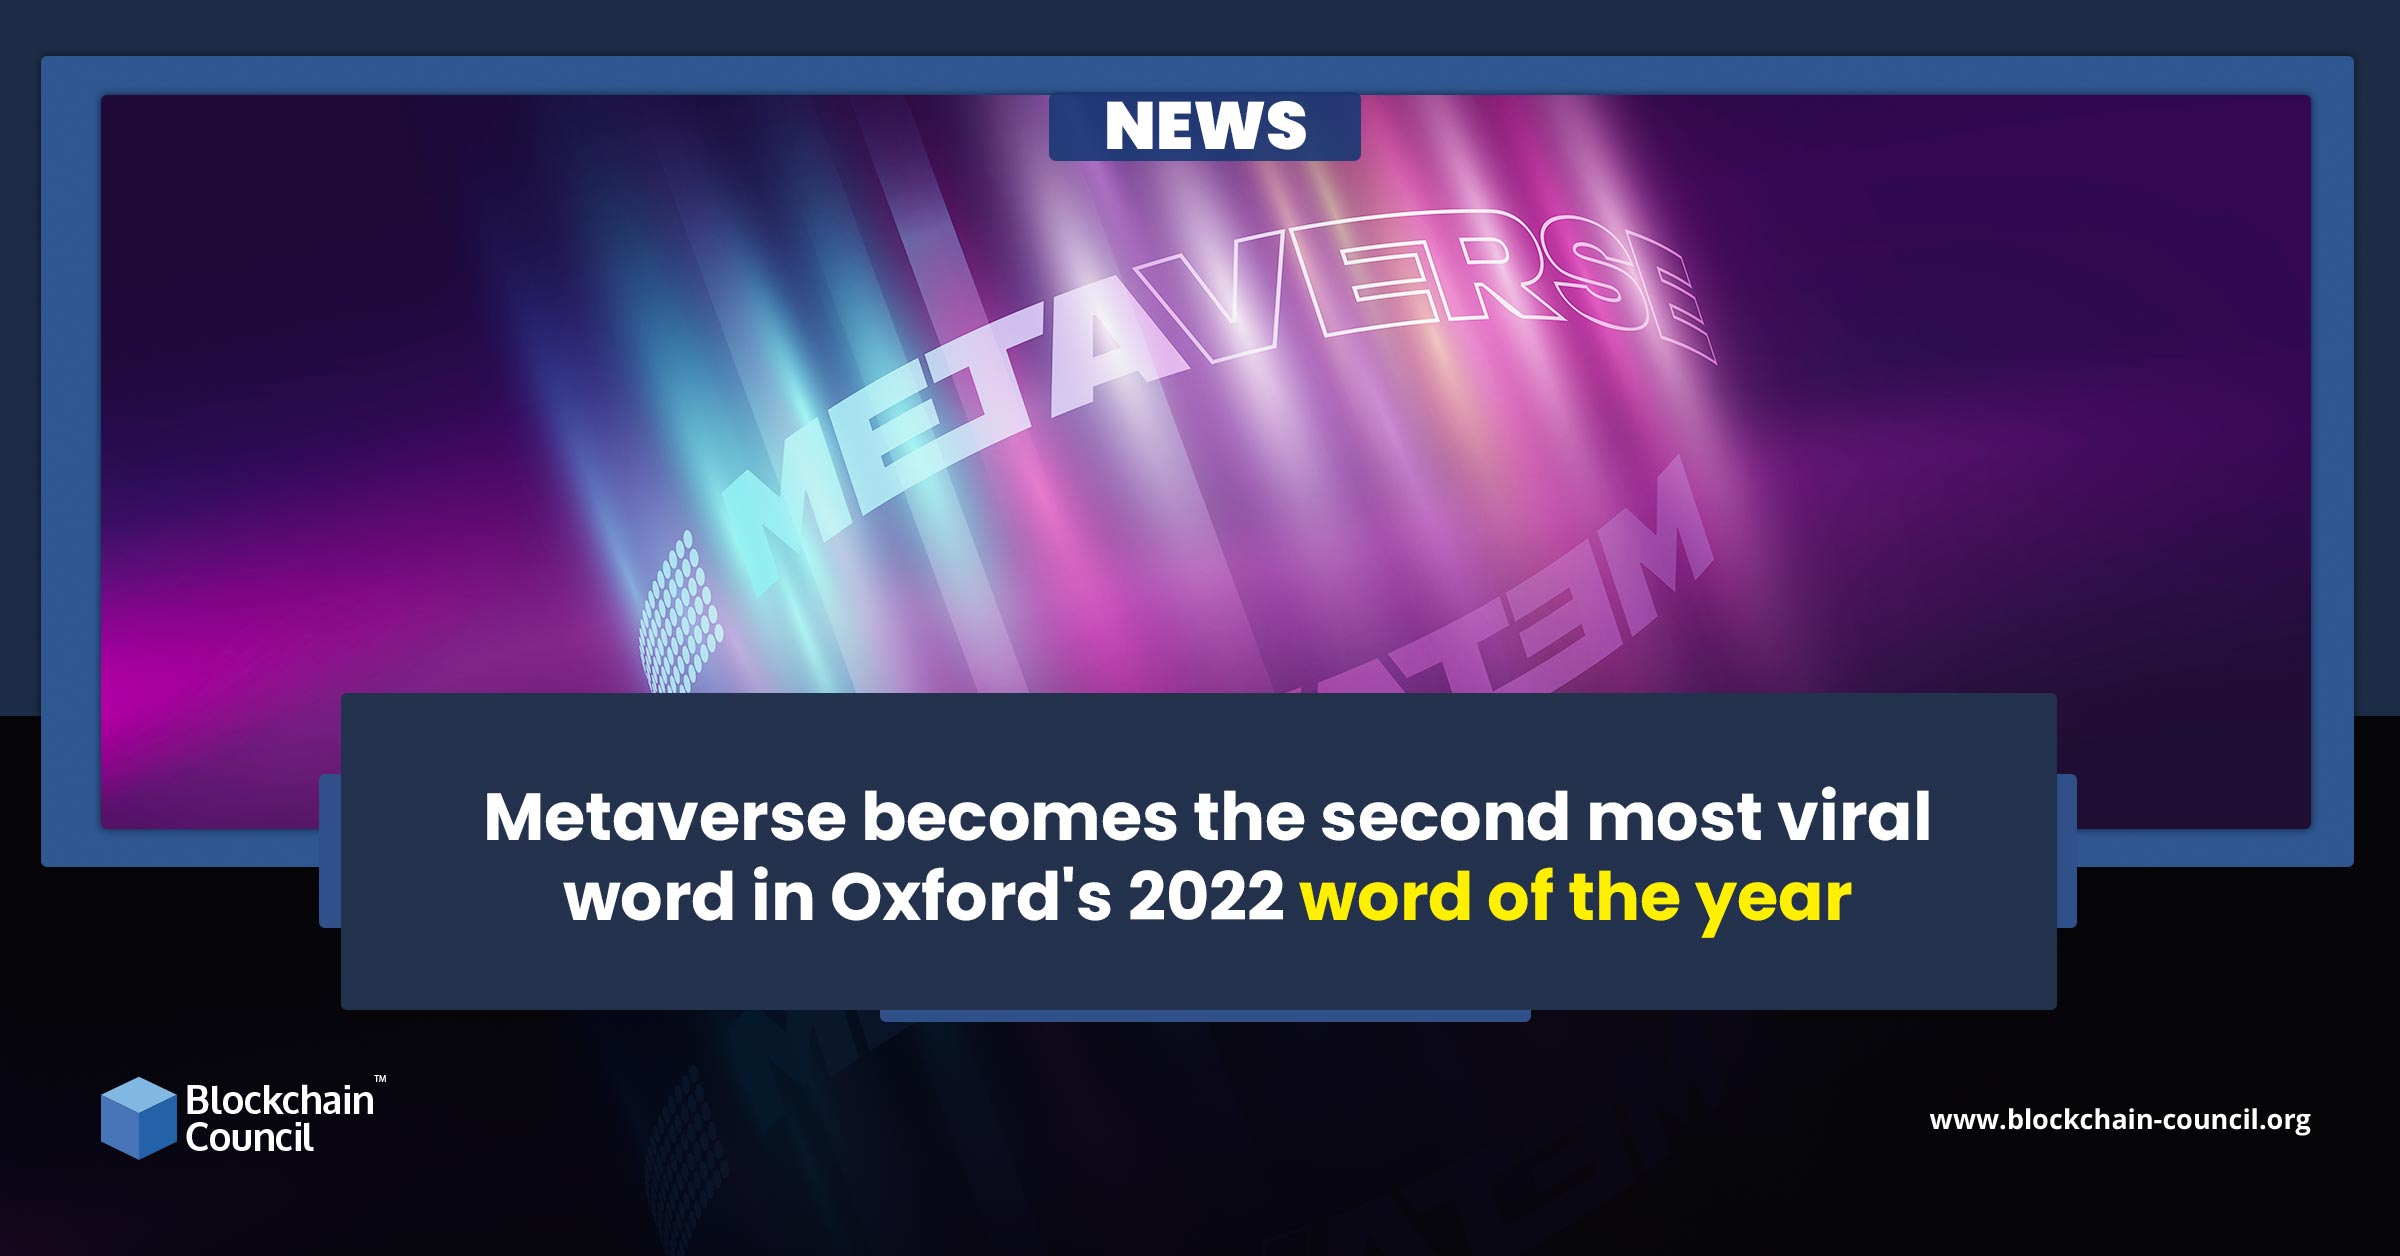 Oxford's 2022 word of the year